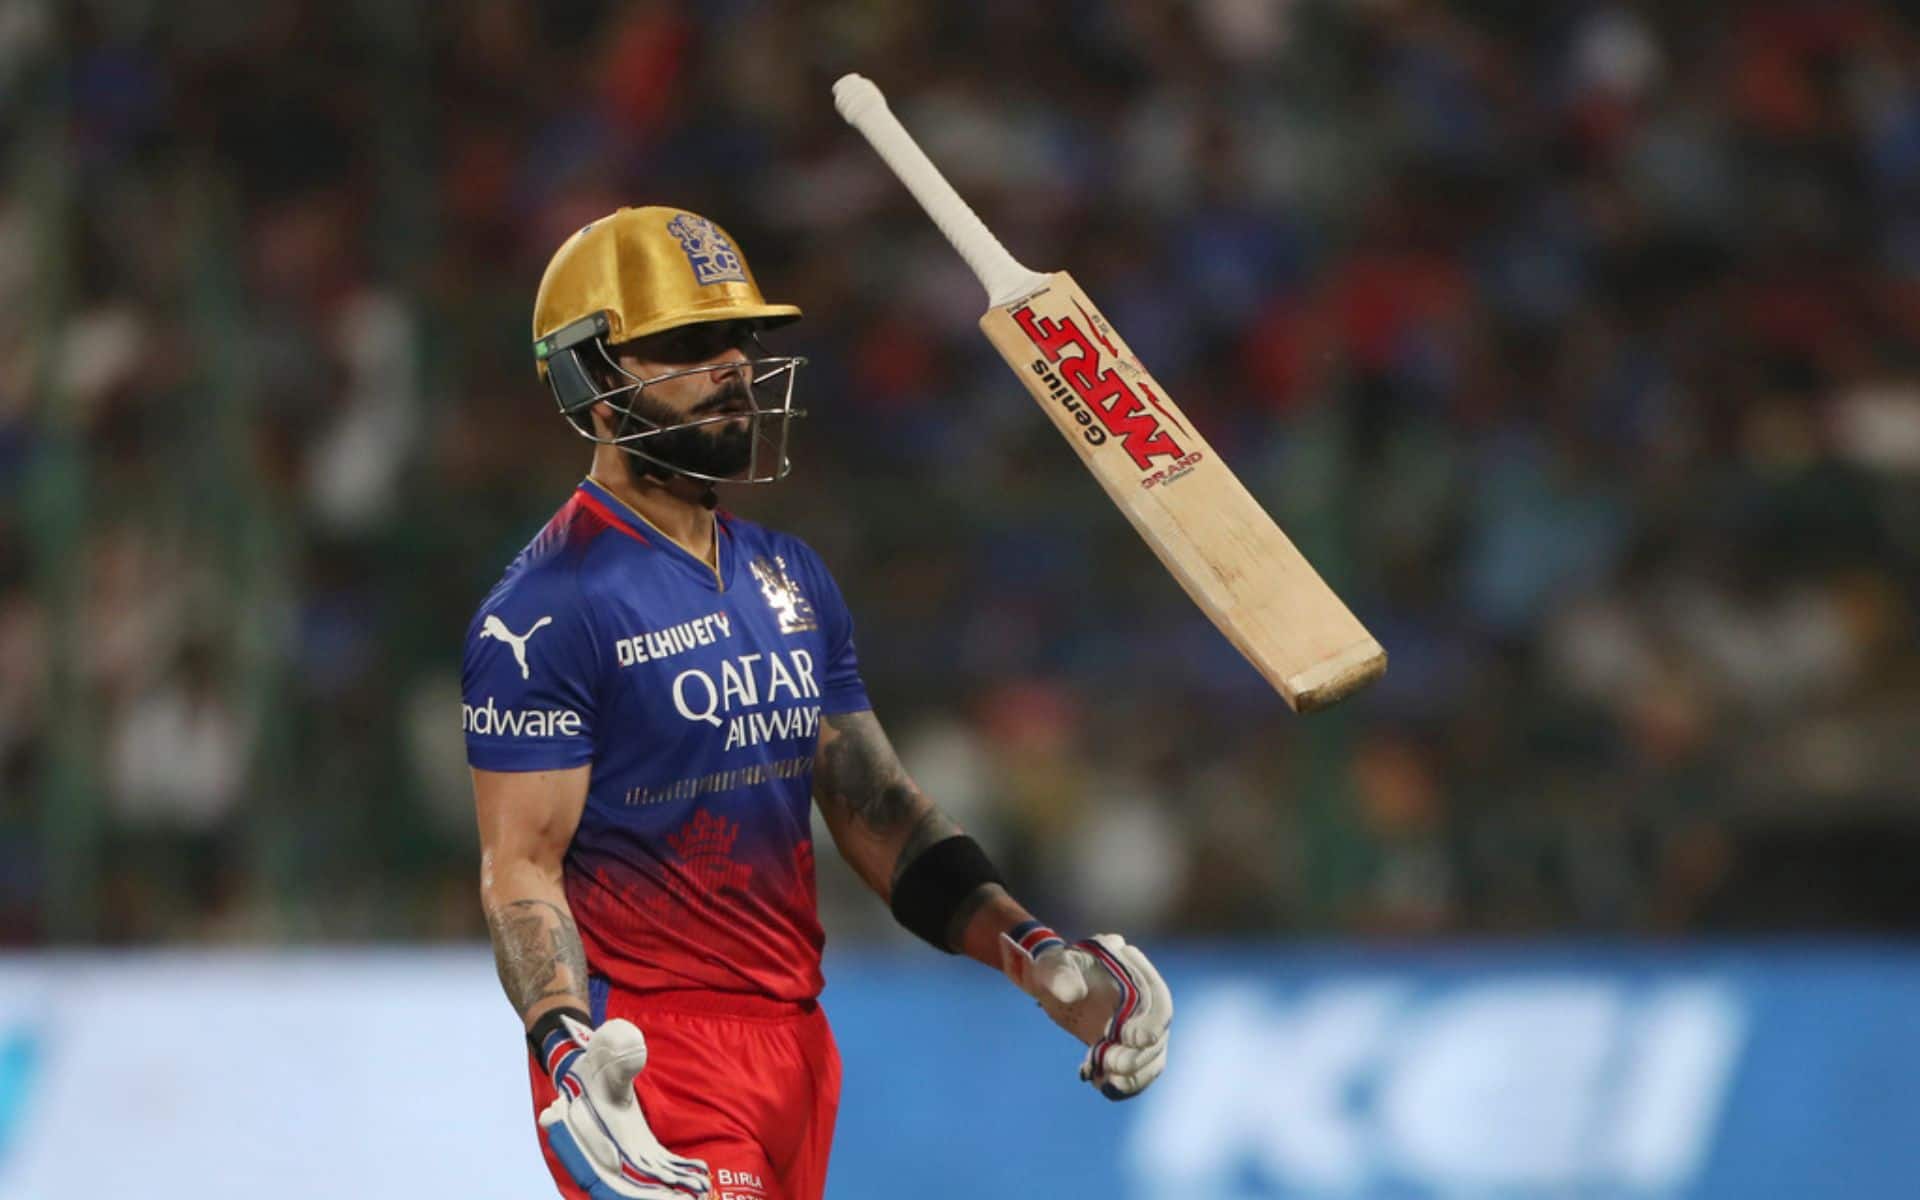 Virat Kohli To Be Dismissed By Jadeja; 3 Player Battles To Watch Out For In RCB Vs CSK